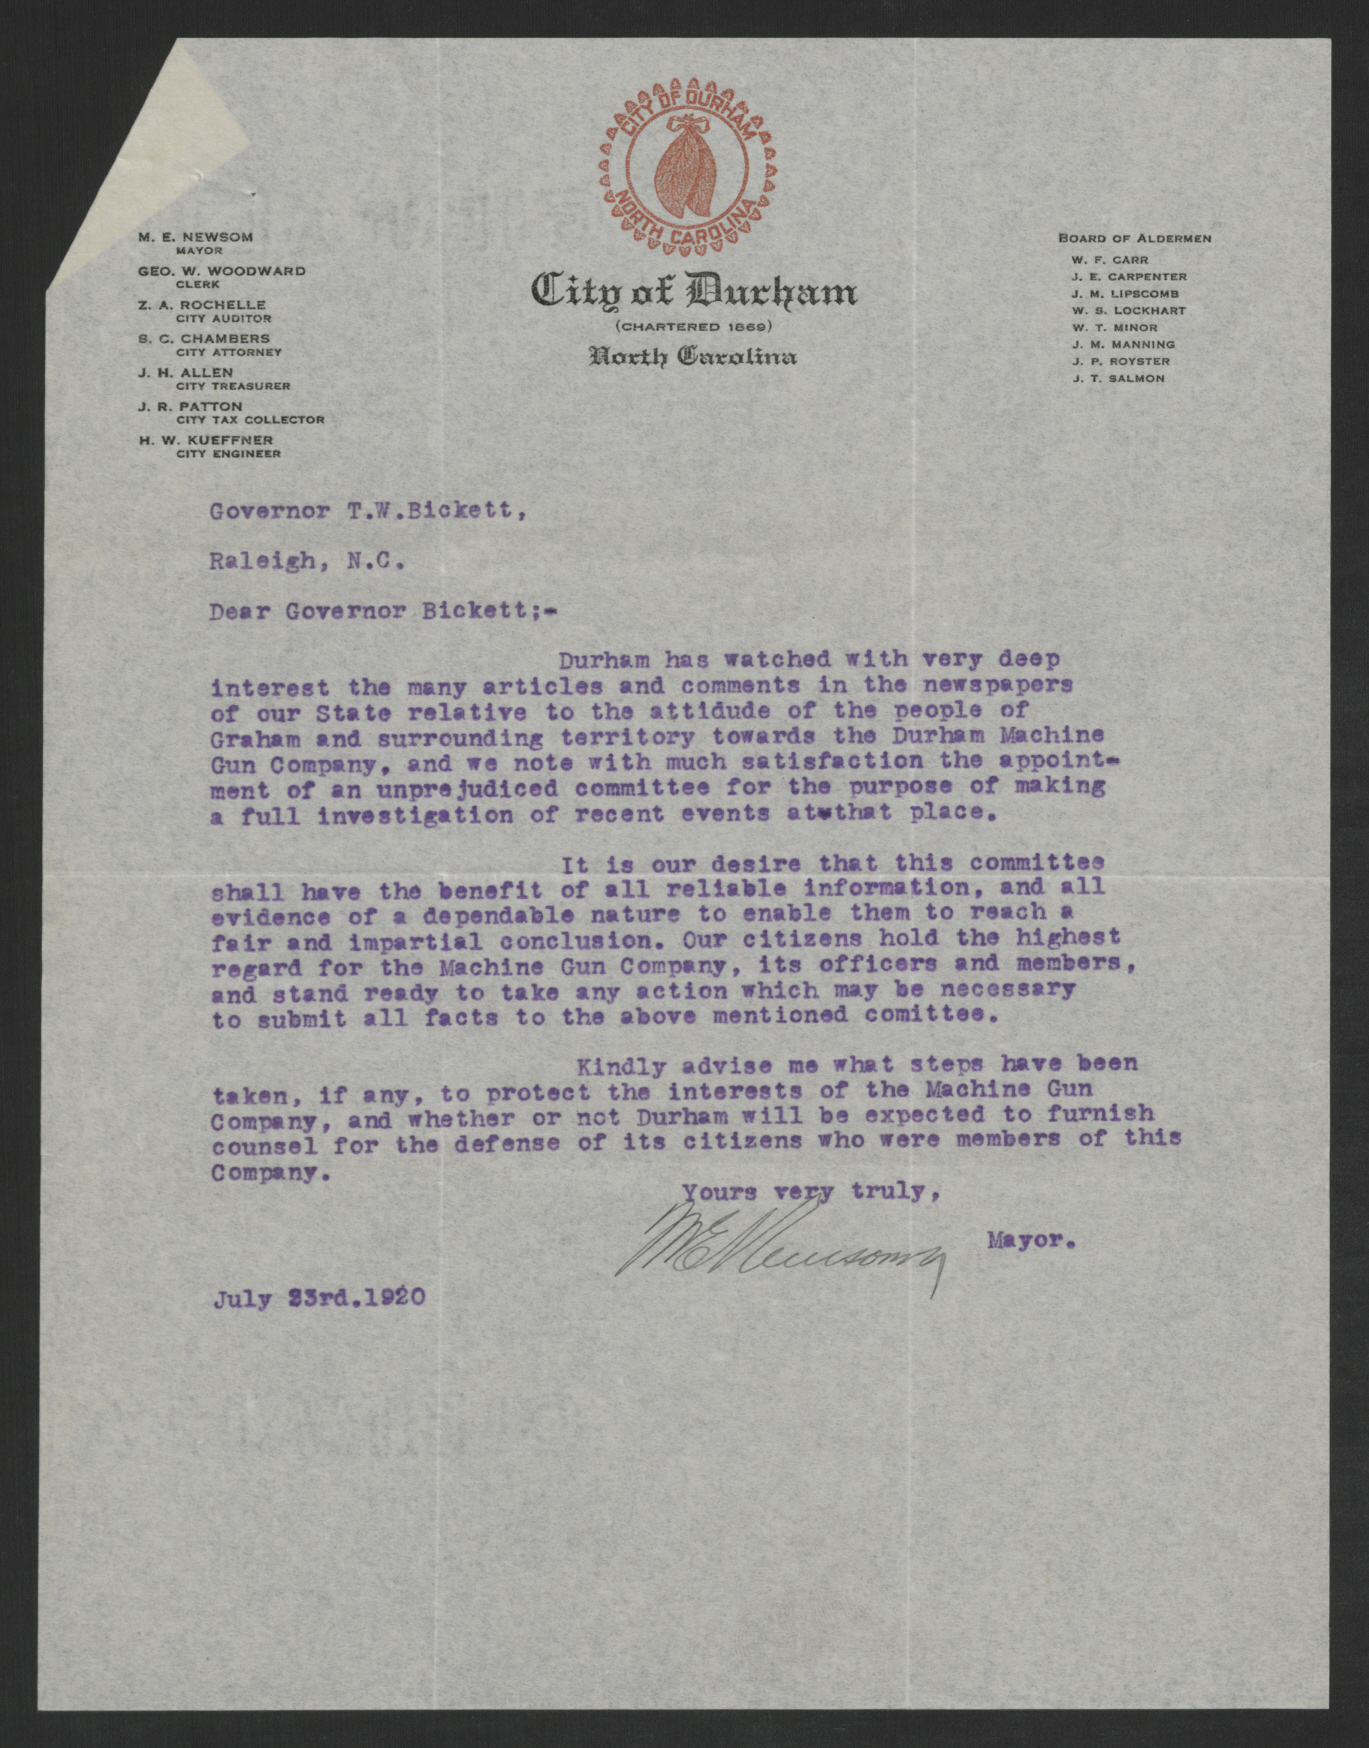 Letter from Marion E. Newsom to Thomas W. Bickett, July 23, 1920